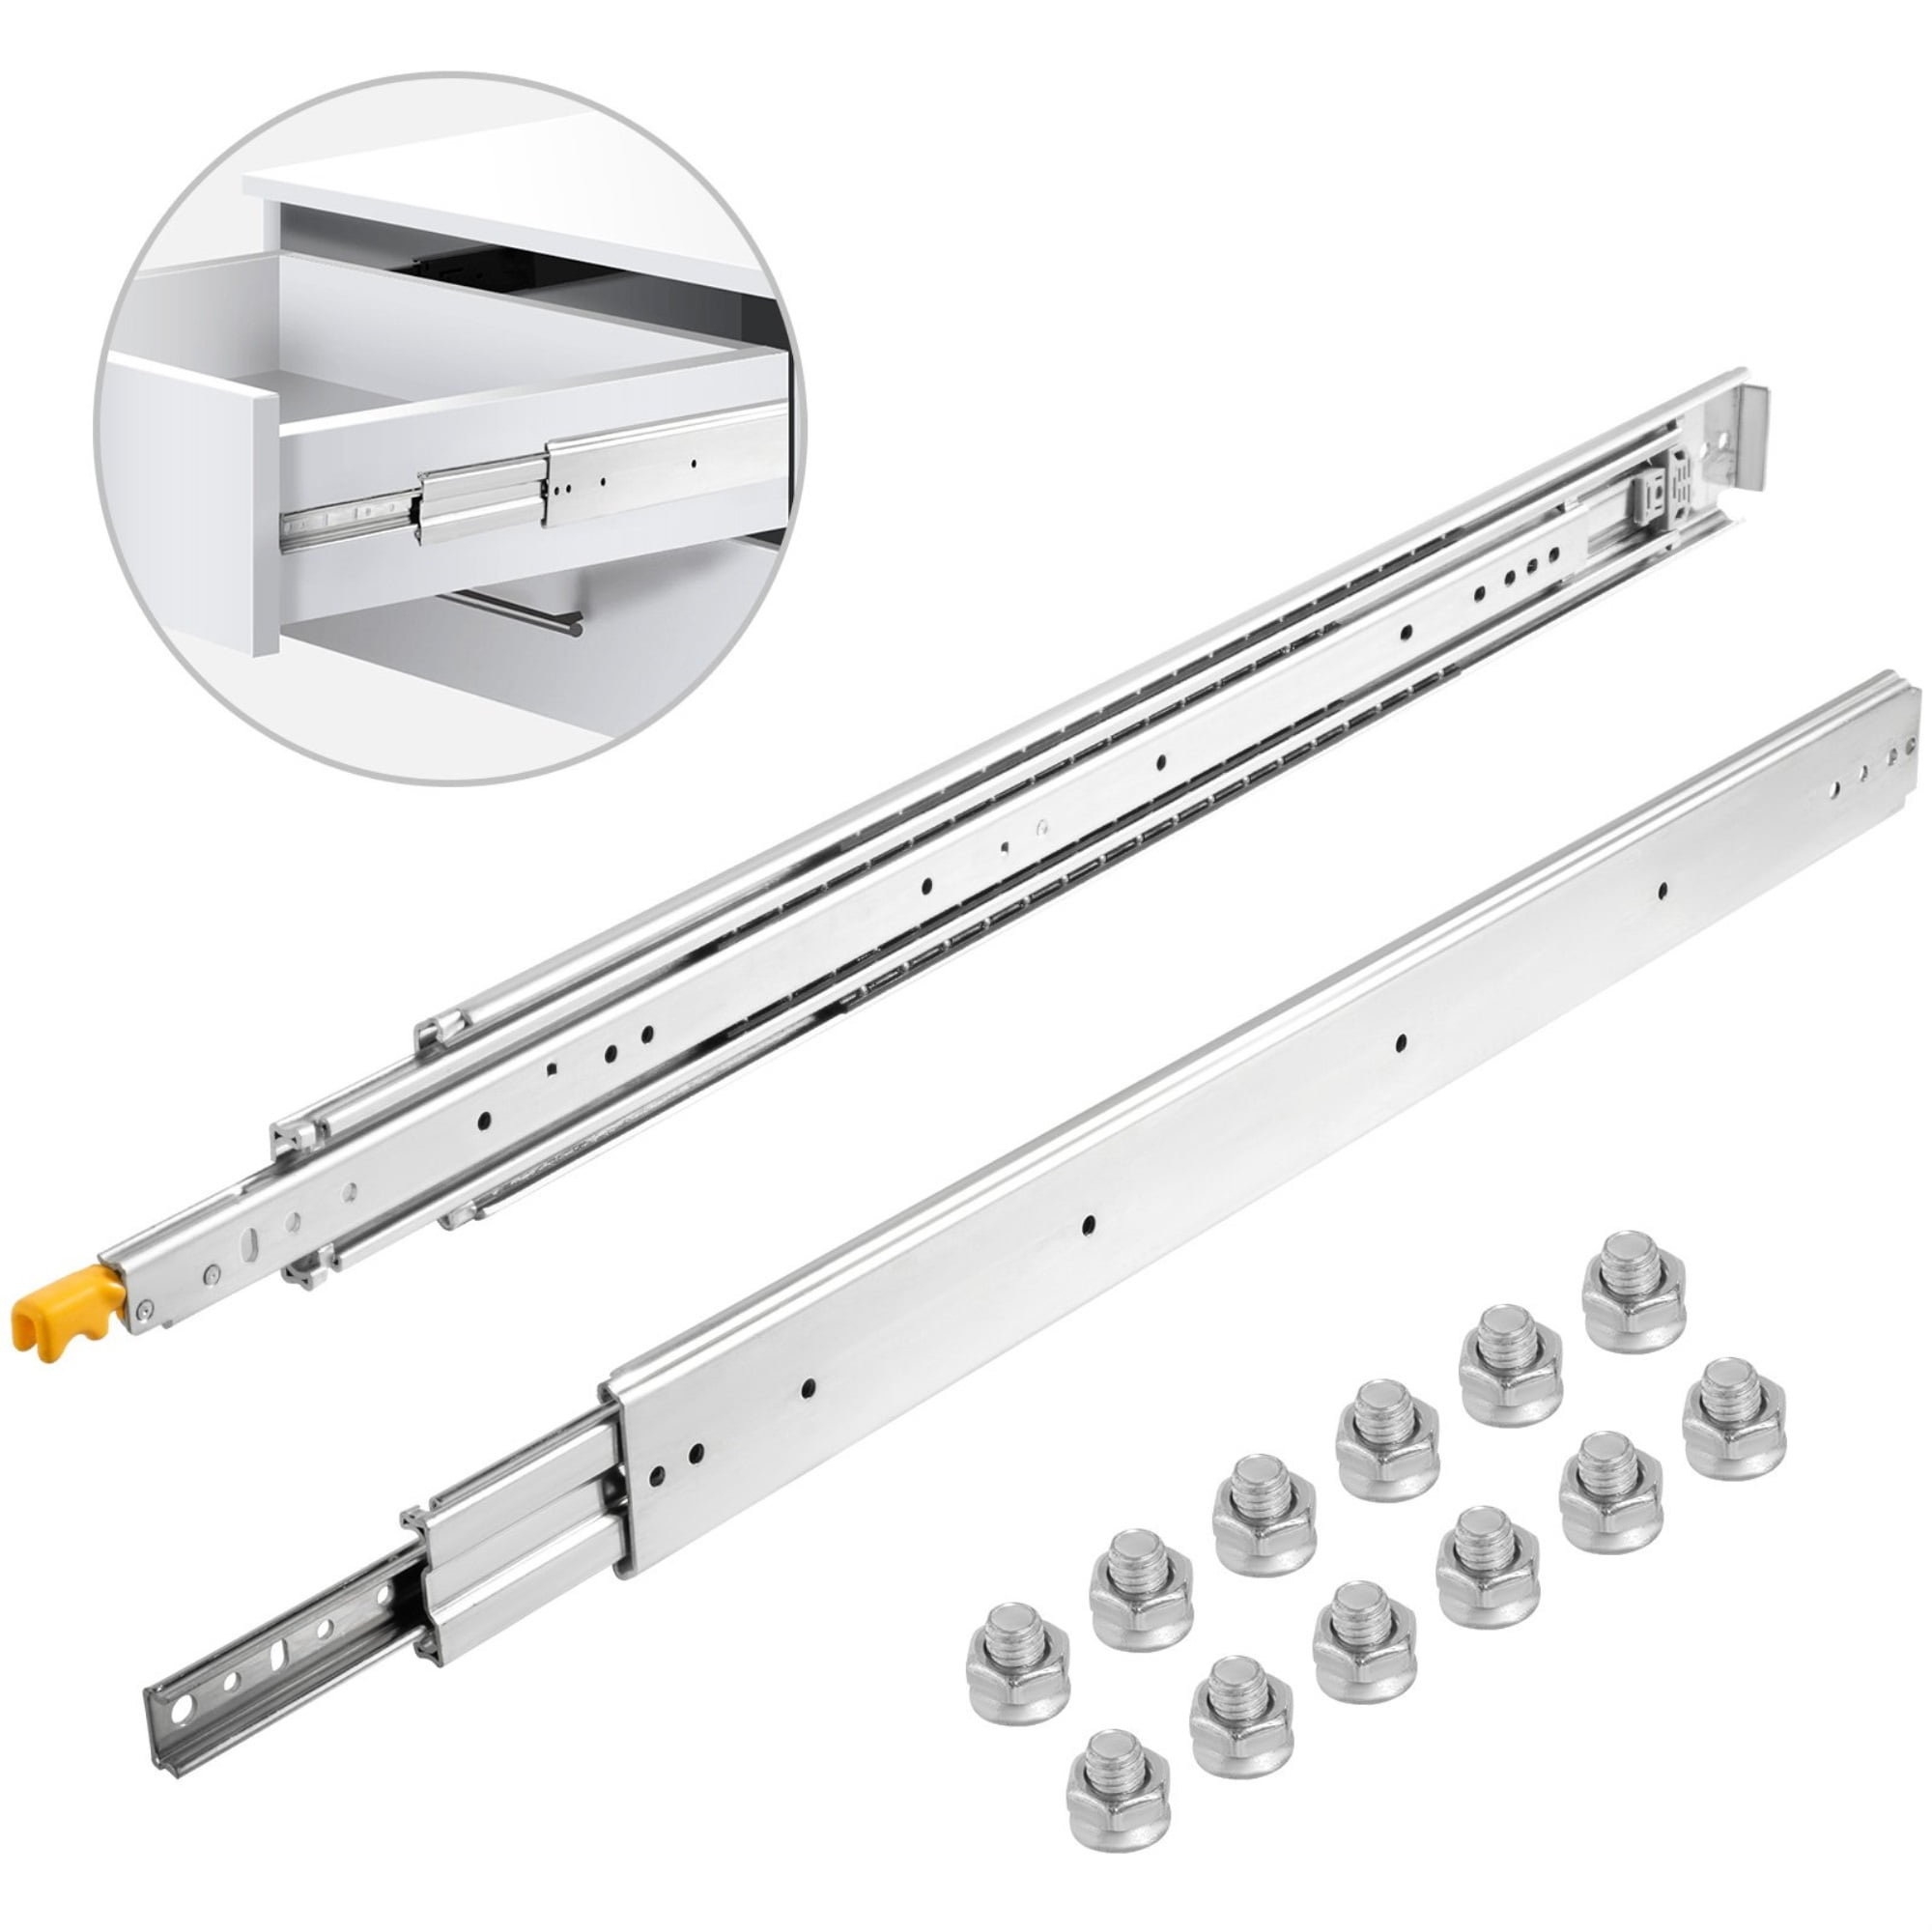 Ball Bearing Drawer Slides 120 LB Load Capacity Xyl Heavy Duty Drawer Runners with Lock Full Extension Side Mount Drawer Slide 